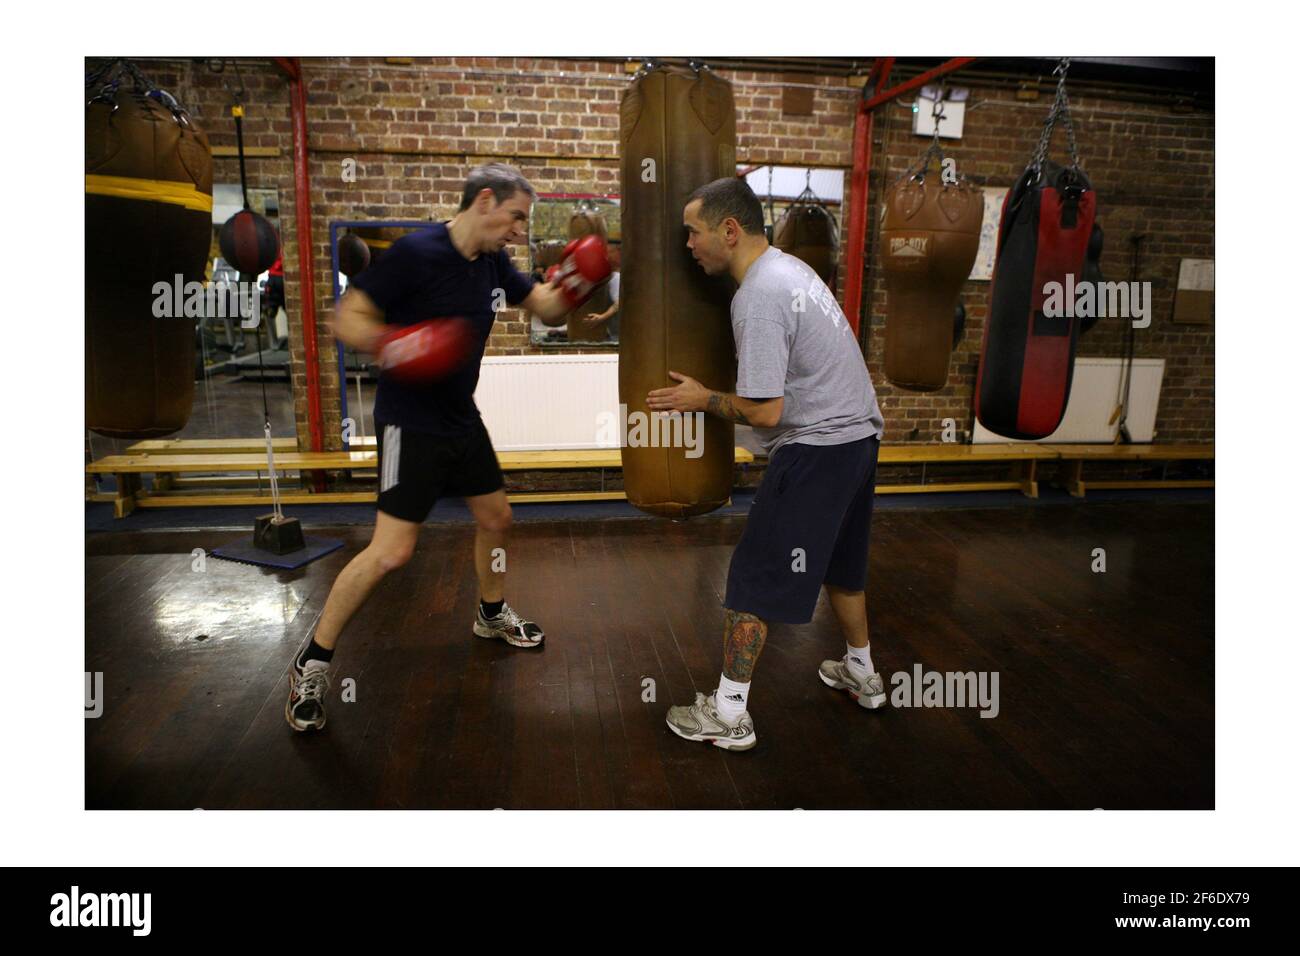 Boxing training for Richard Sharp at Fitzroy Lodge on Lambeth road in London... with Adam Martinphotograph by David Sandison The Independent Stock Photo